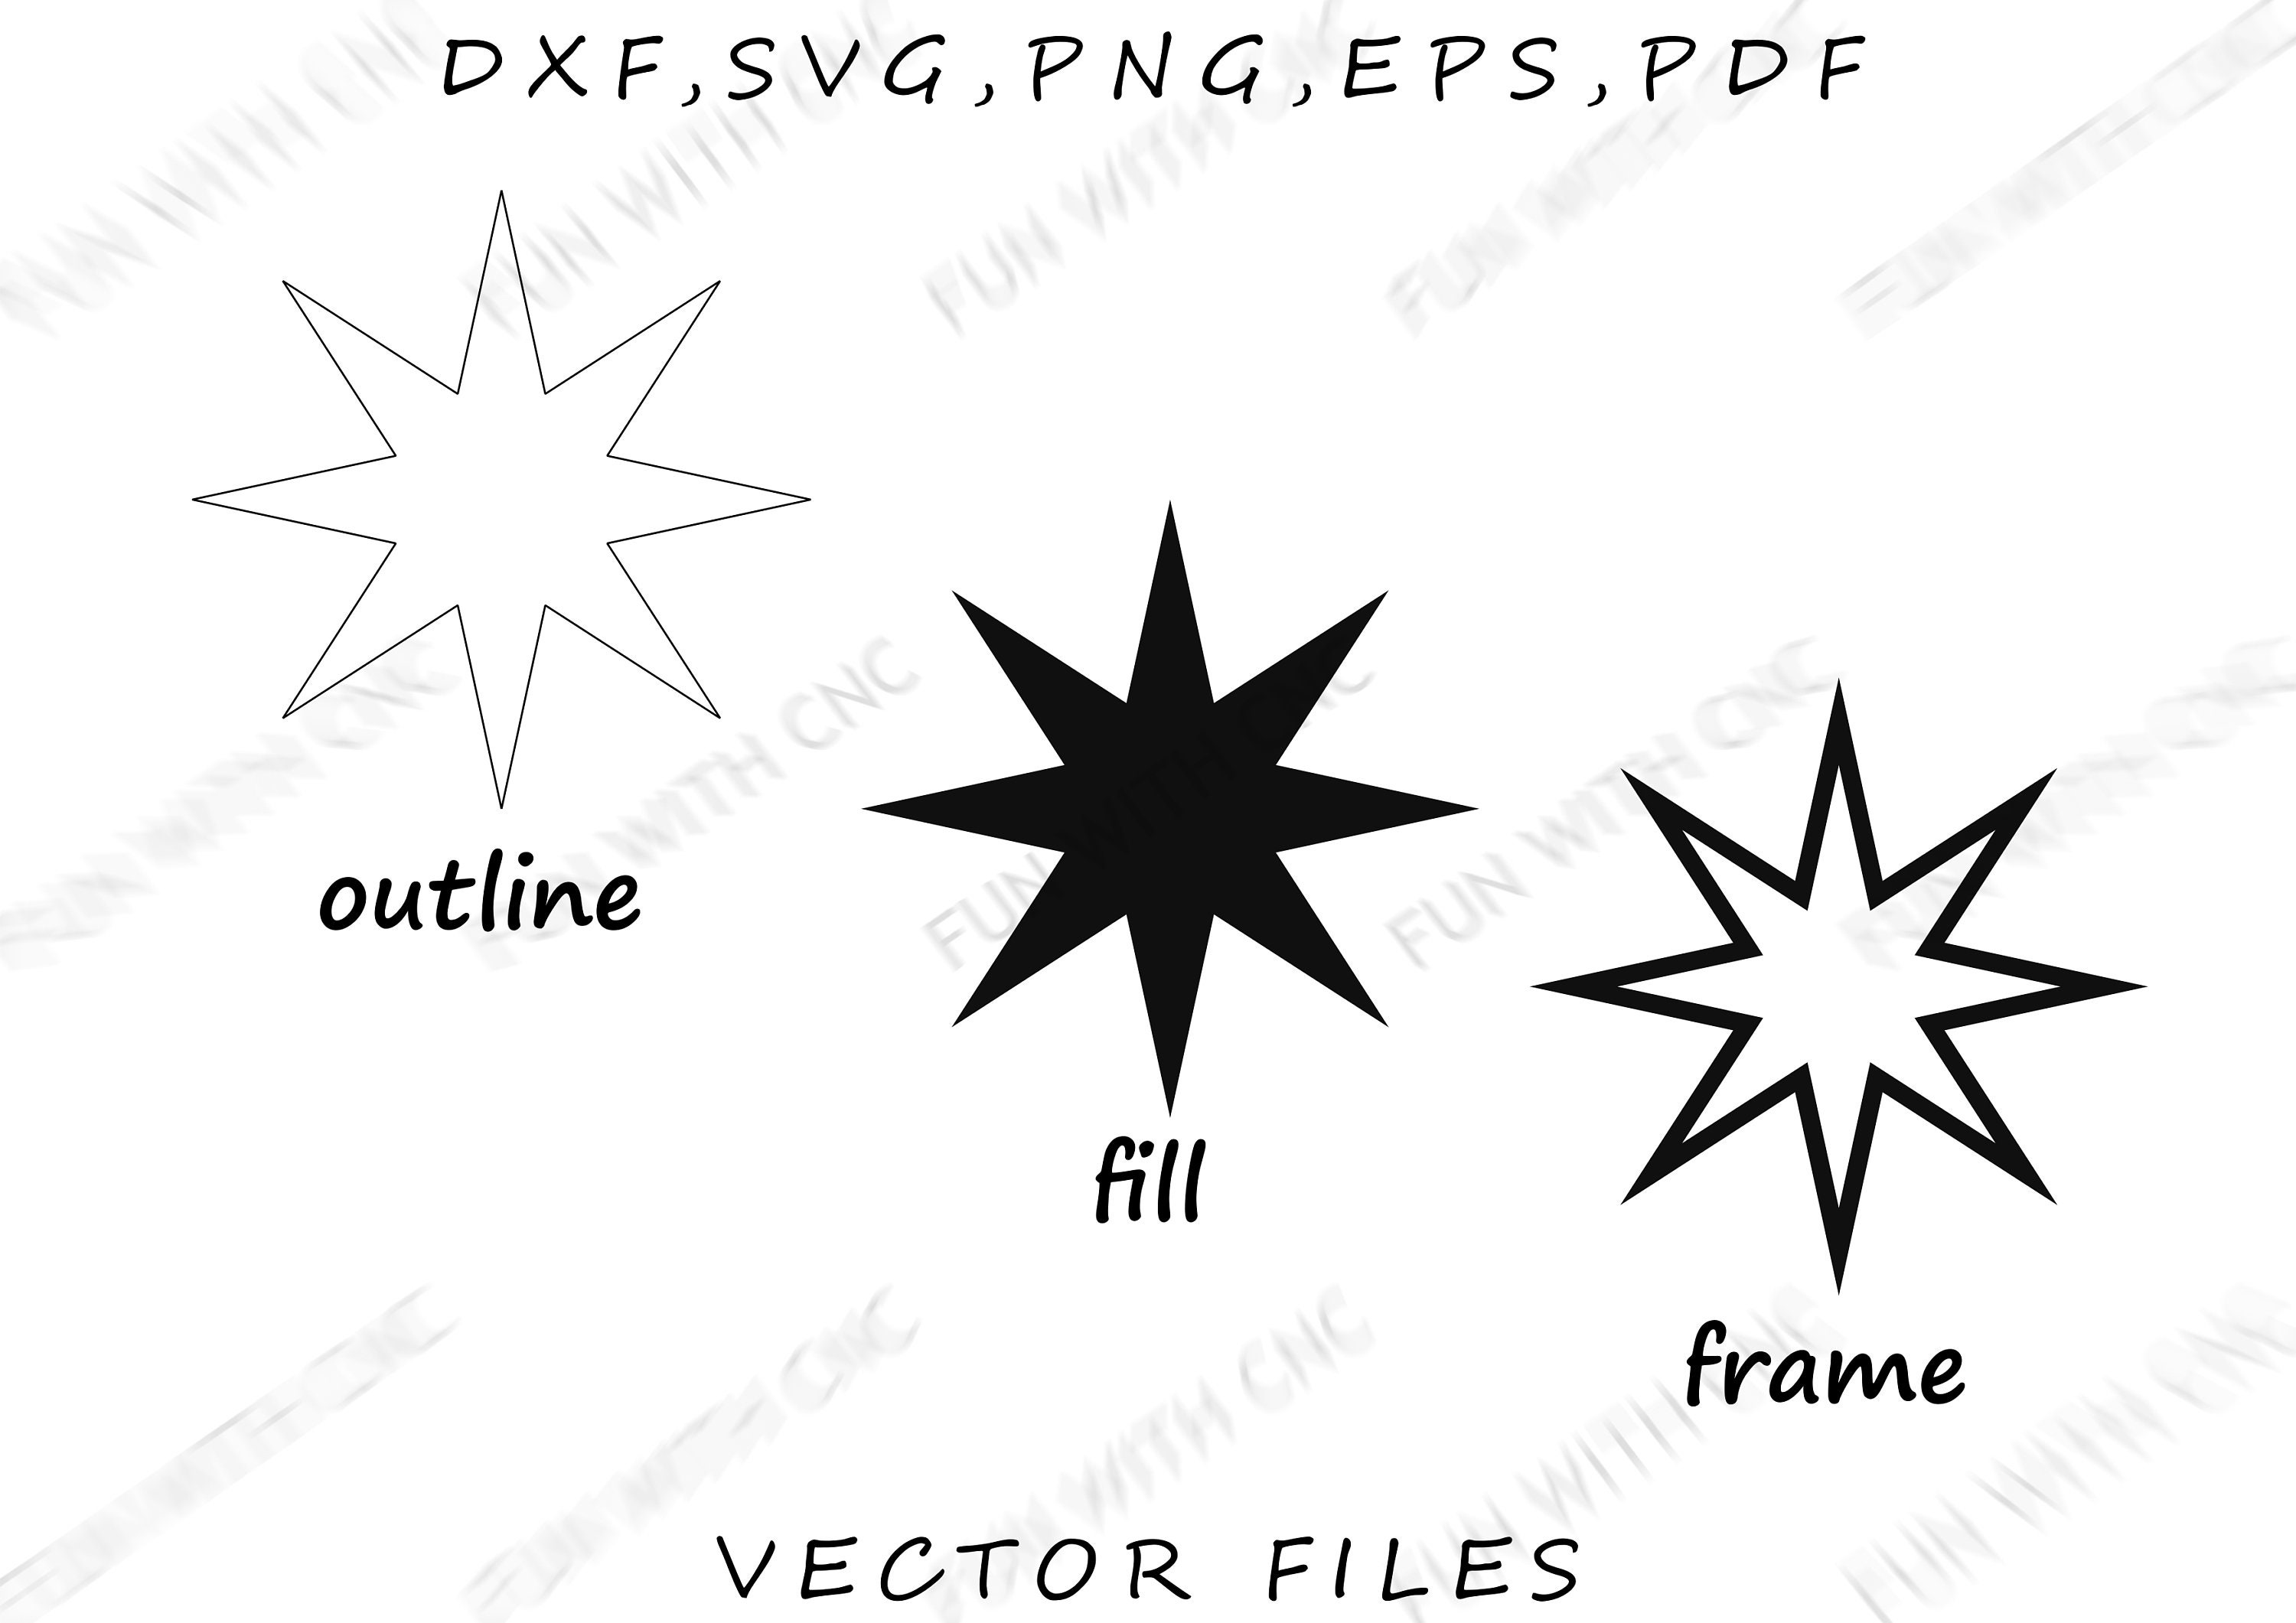 Eight Pointed Star Explosion Flower With Four Petals, And Blue Round FIVE  STARS Rough Watermark With Icon Inside. Object Curl Composed From Oriented  Eight Pointed Star Symbols. Royalty Free SVG, Cliparts, Vectors